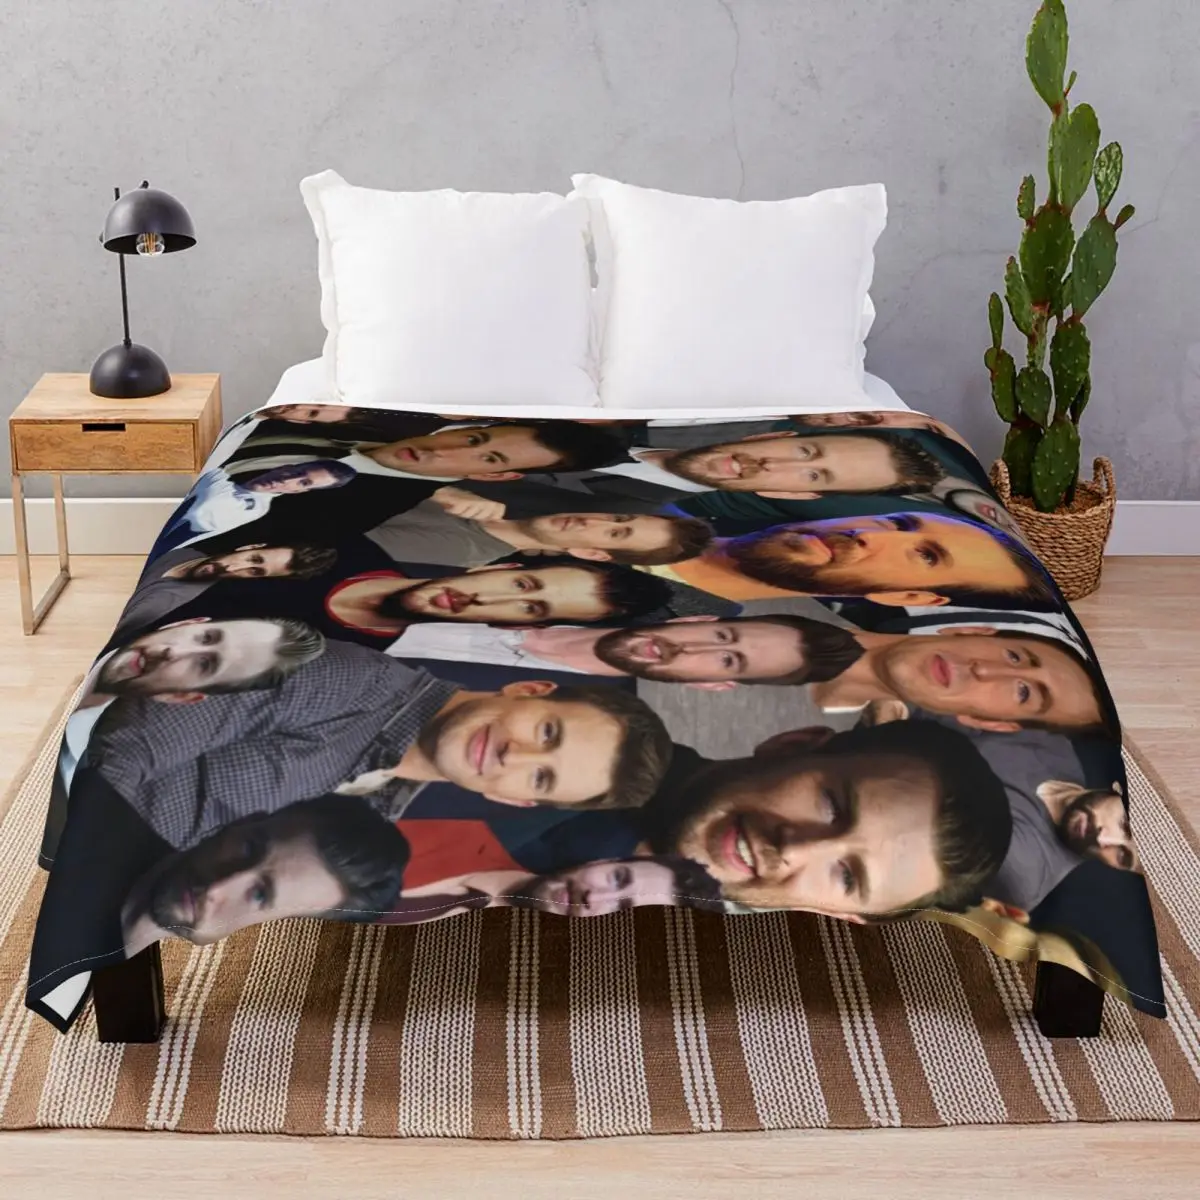 Chris Evans Photo Collage Blanket Flannel Printed Warm Throw Blankets for Bed Home Couch Travel Office